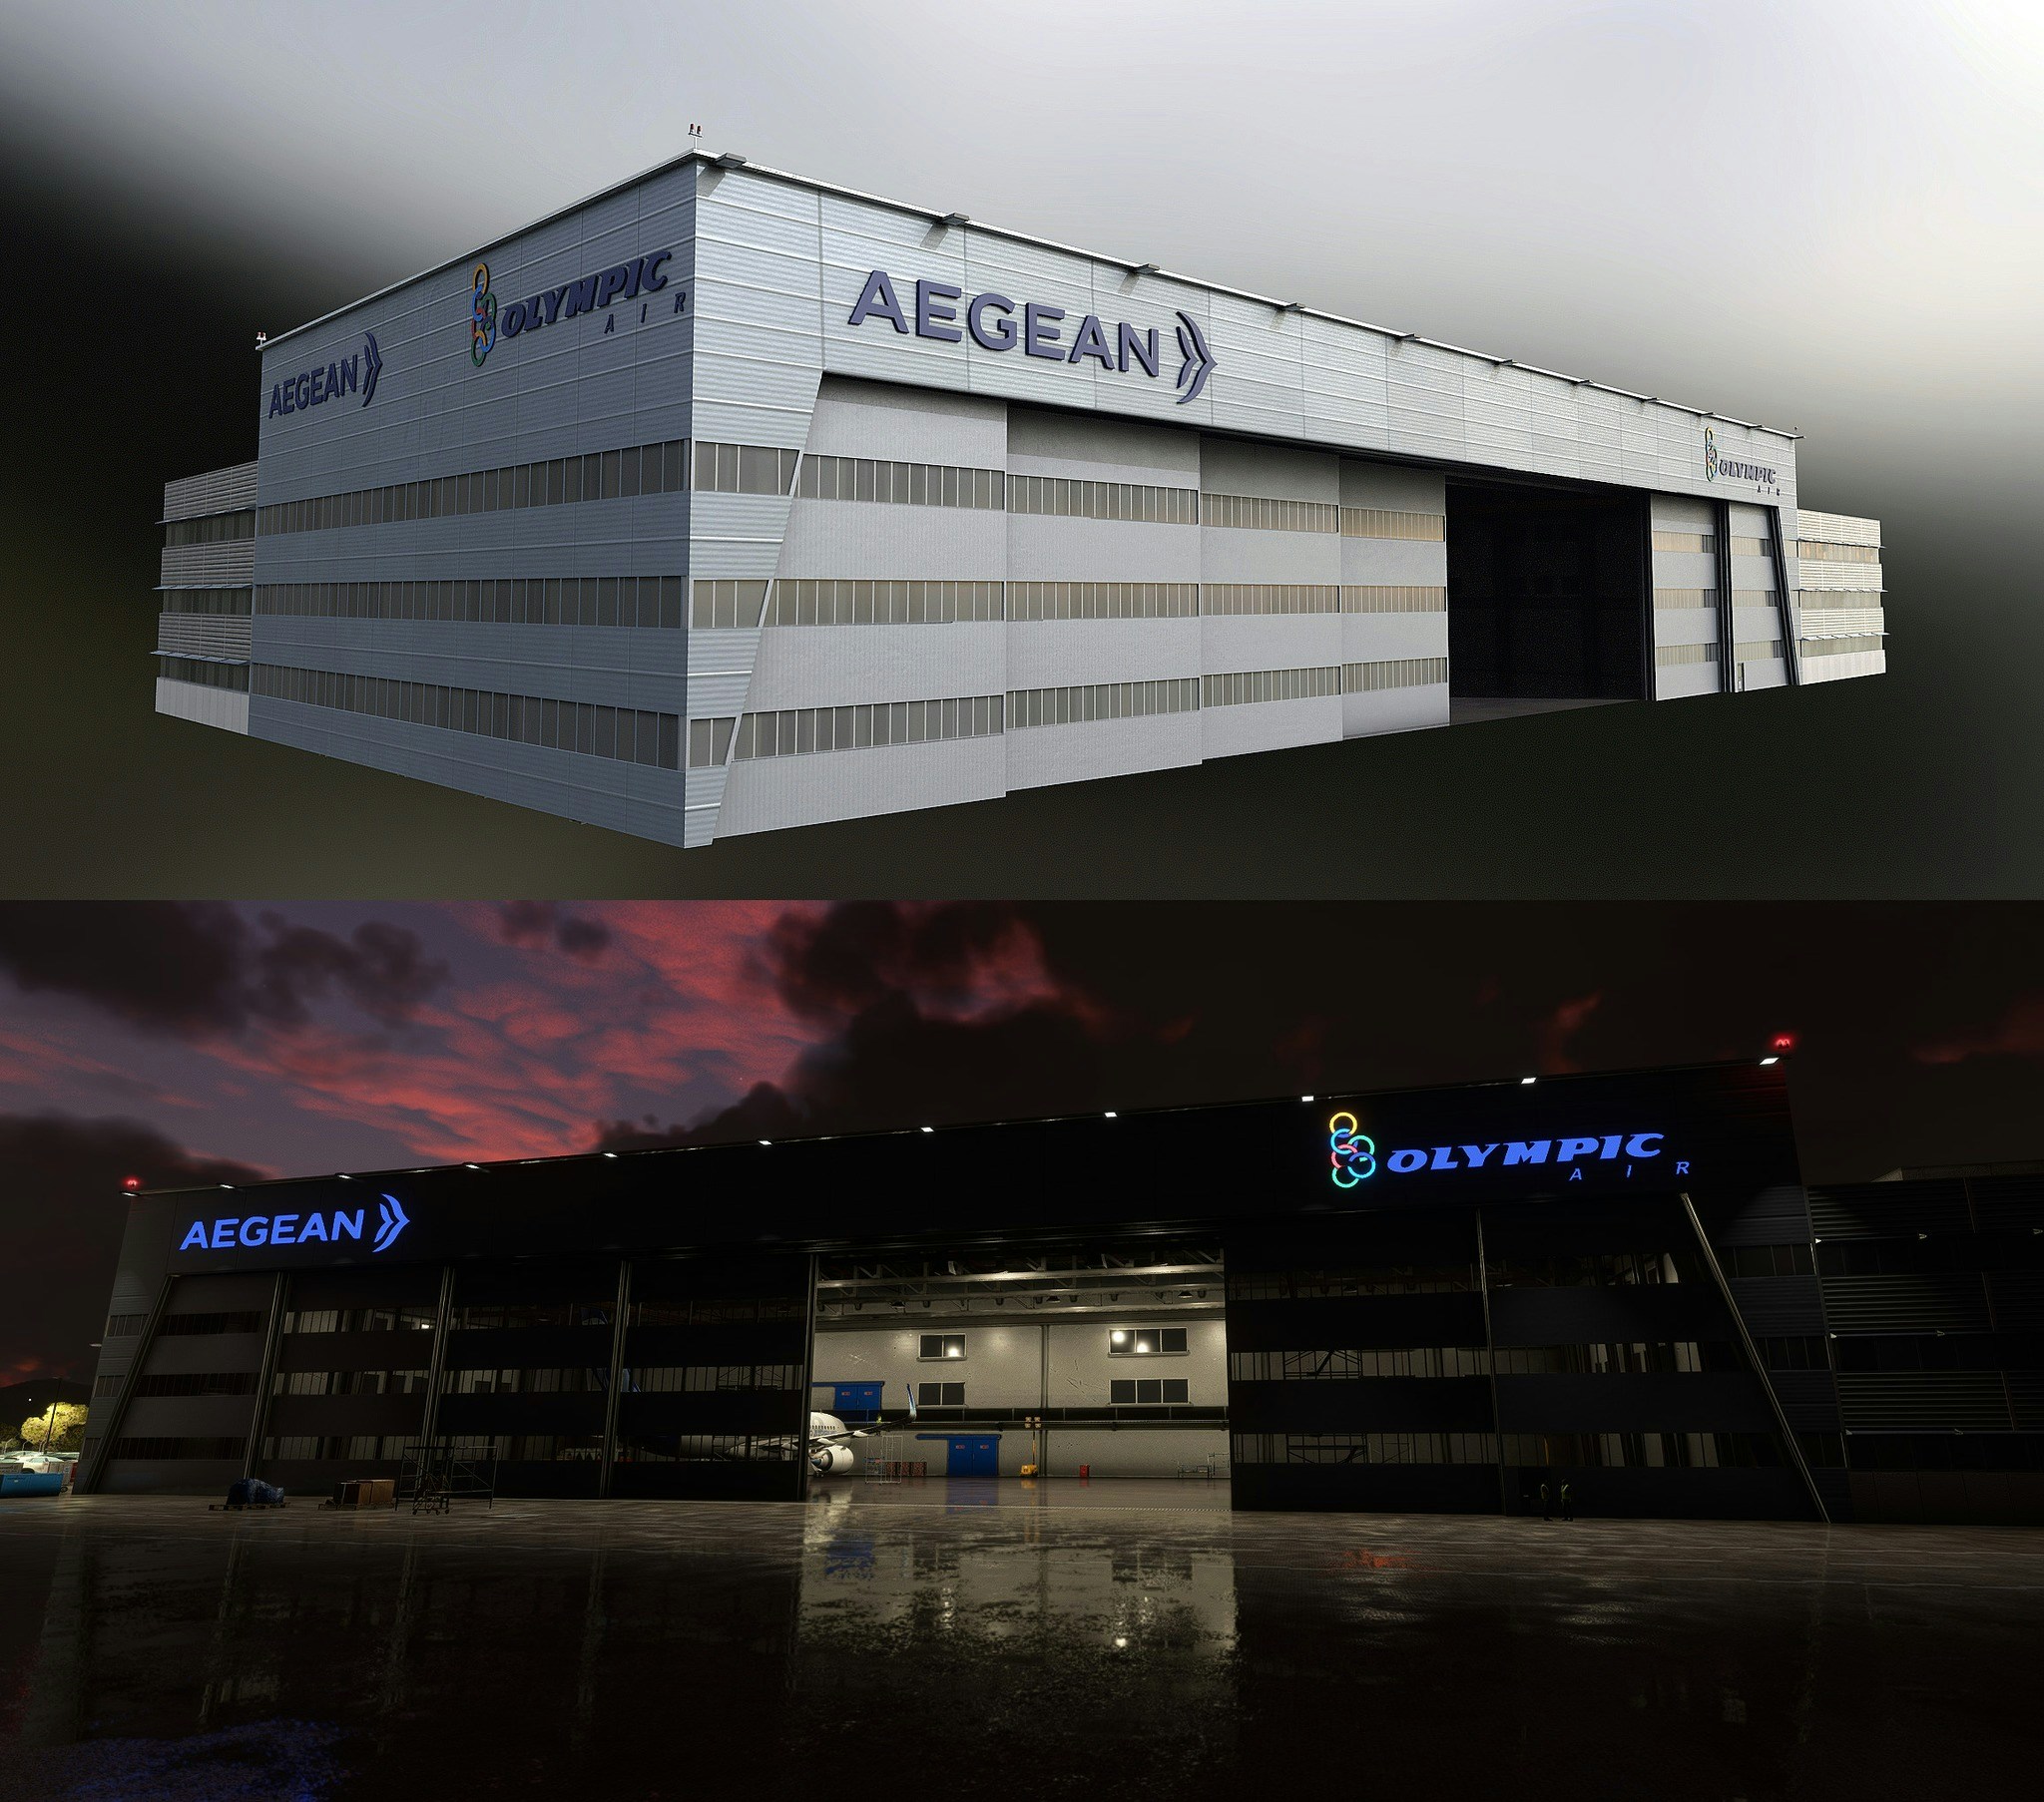 FlyTampa Update Athens Scenery to V1.6 in MSFS